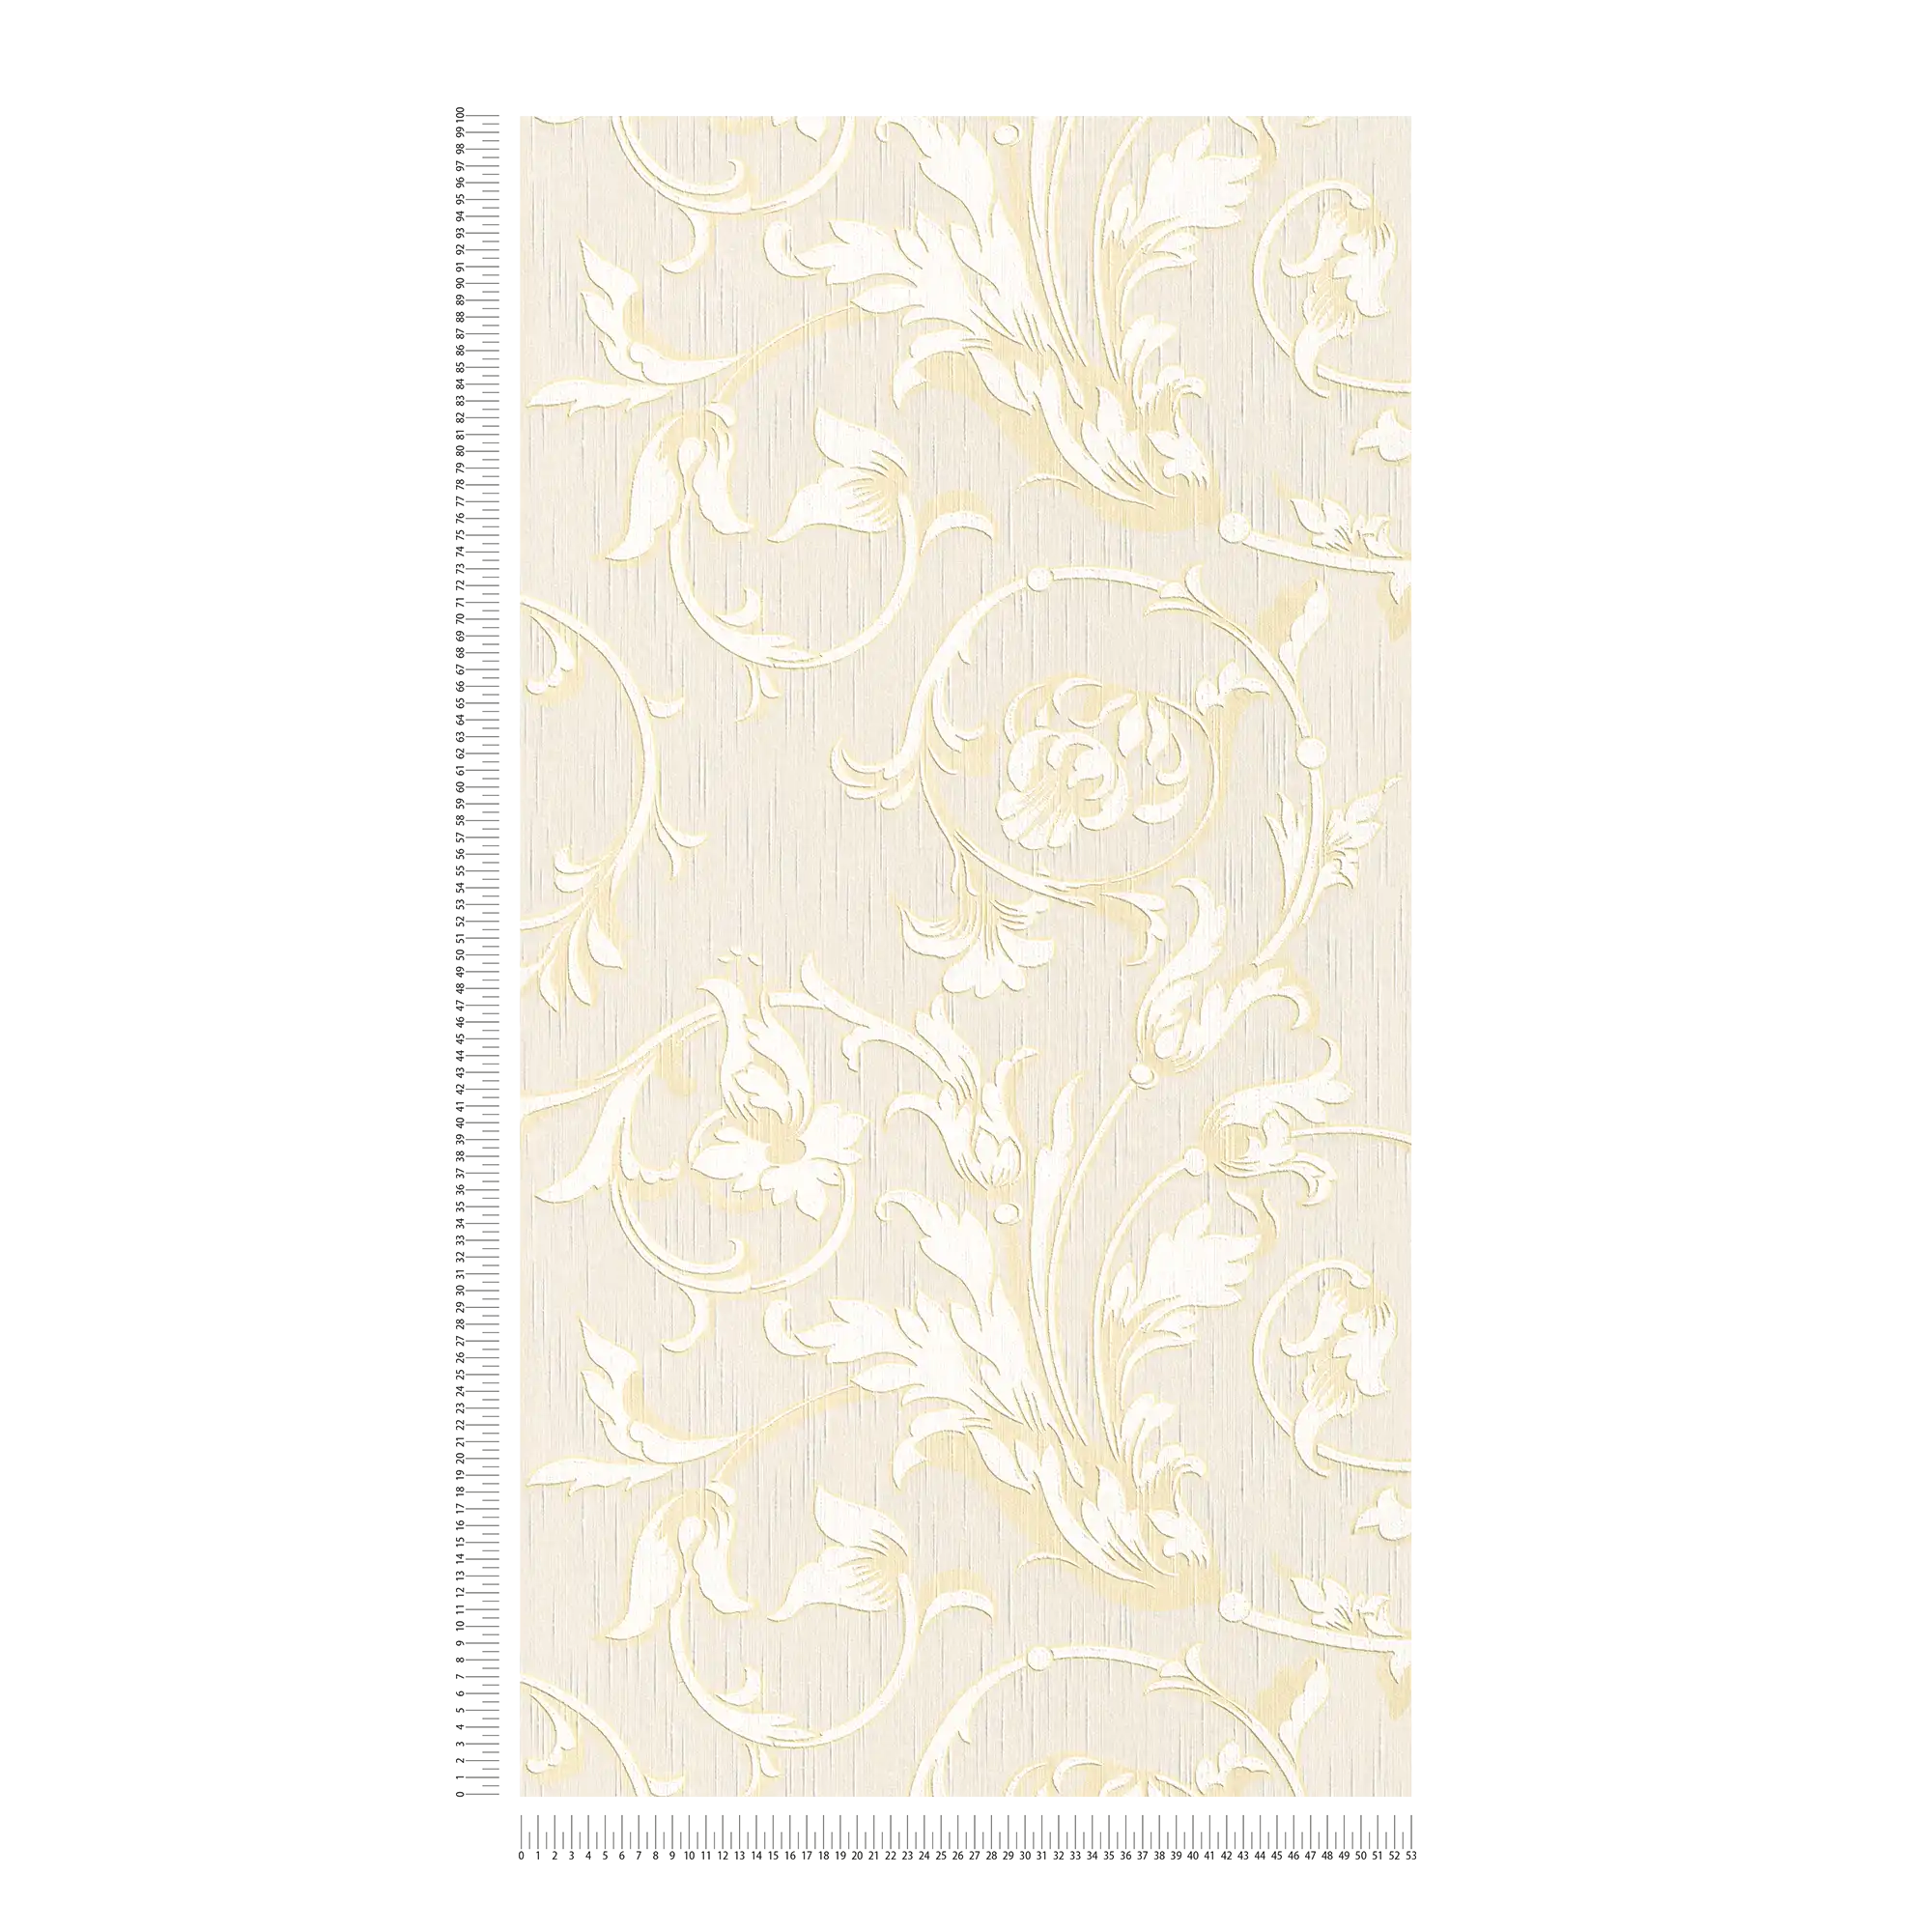             Hermitage wallpaper with floral ornament - beige, cream
        